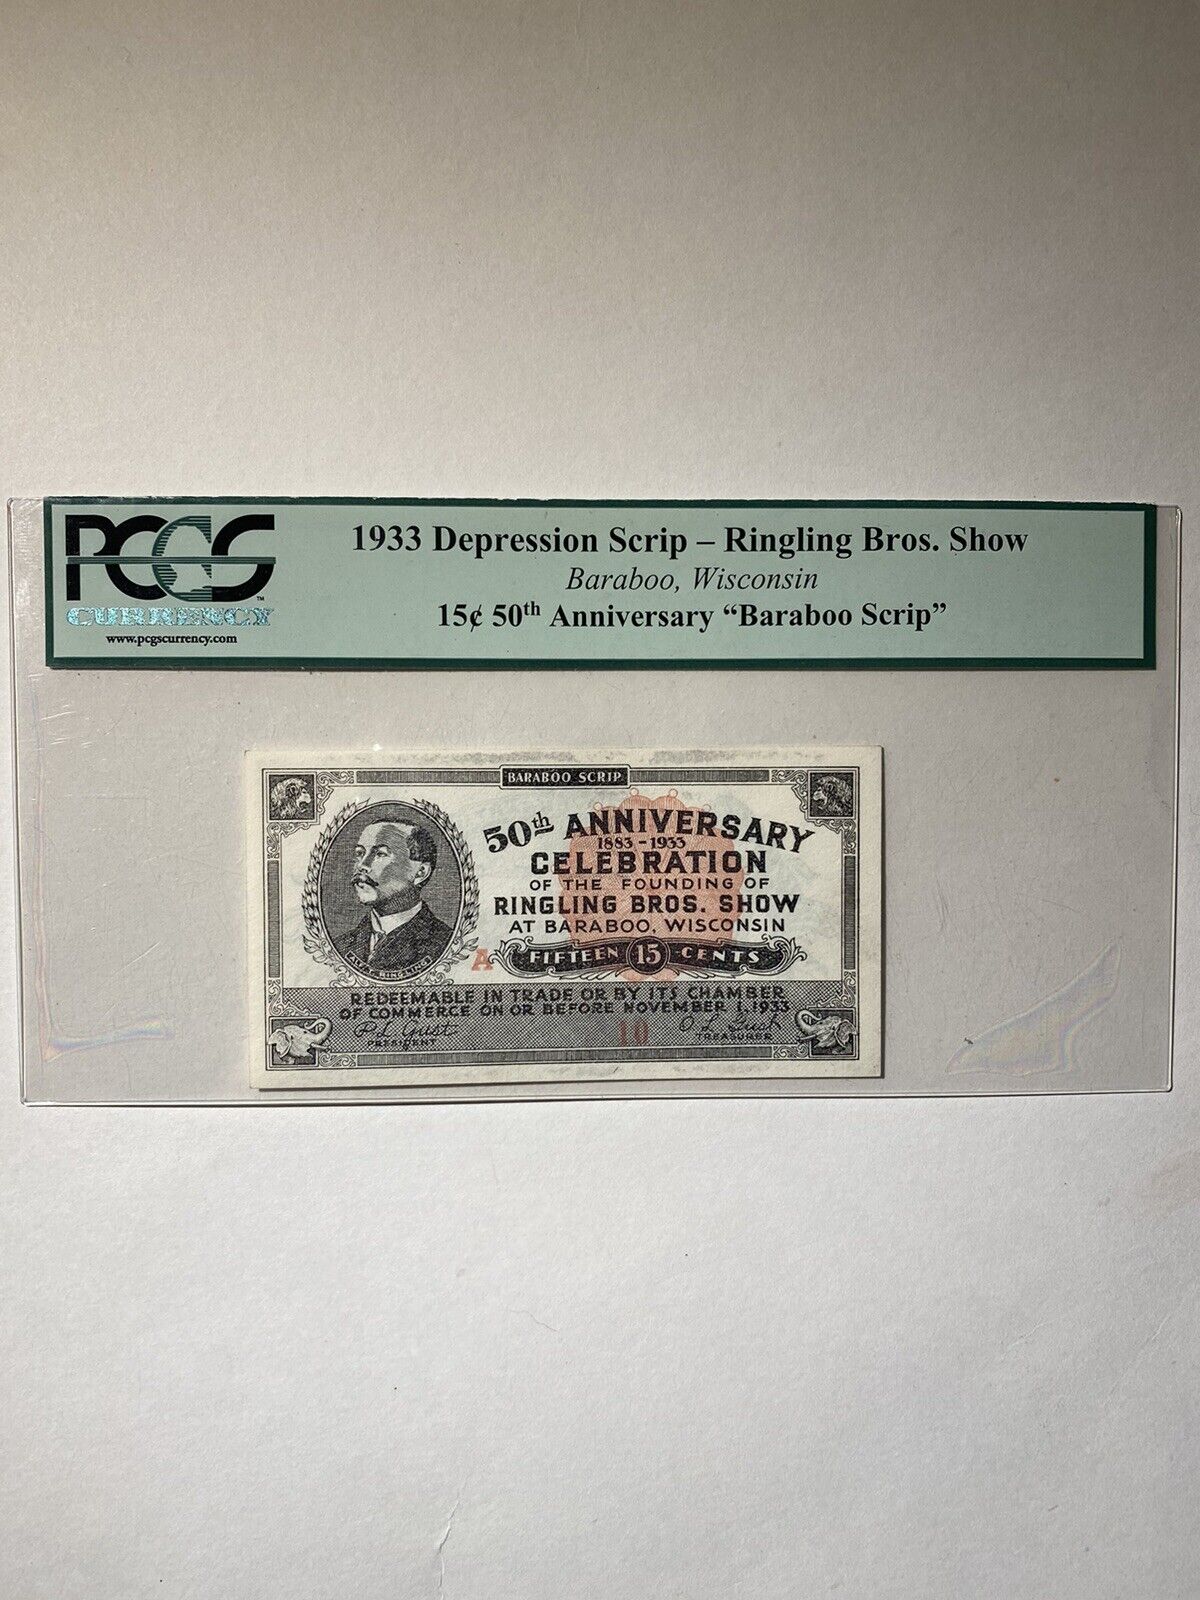 1933 Depression Scrip Ringling Bros. Show Baraboo Wisconsin 15 Cents